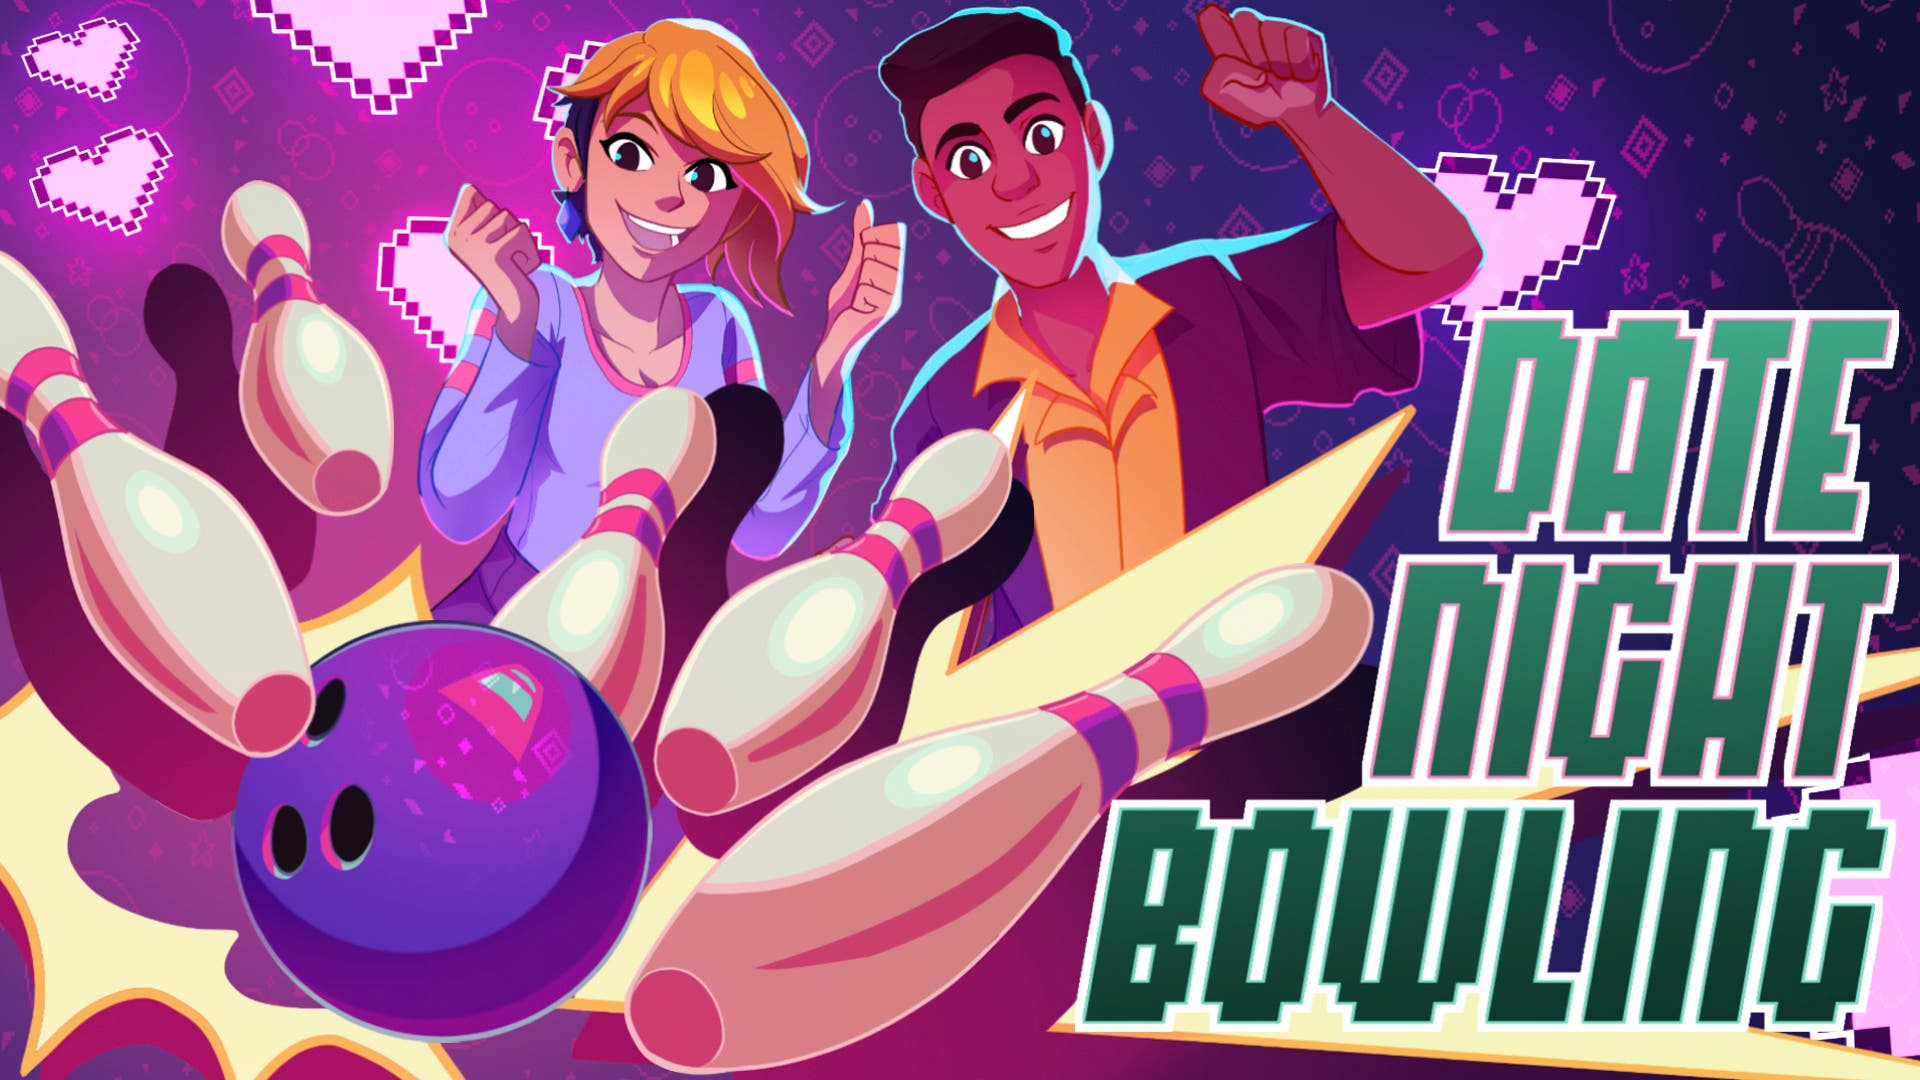 DateNightBowling review featured